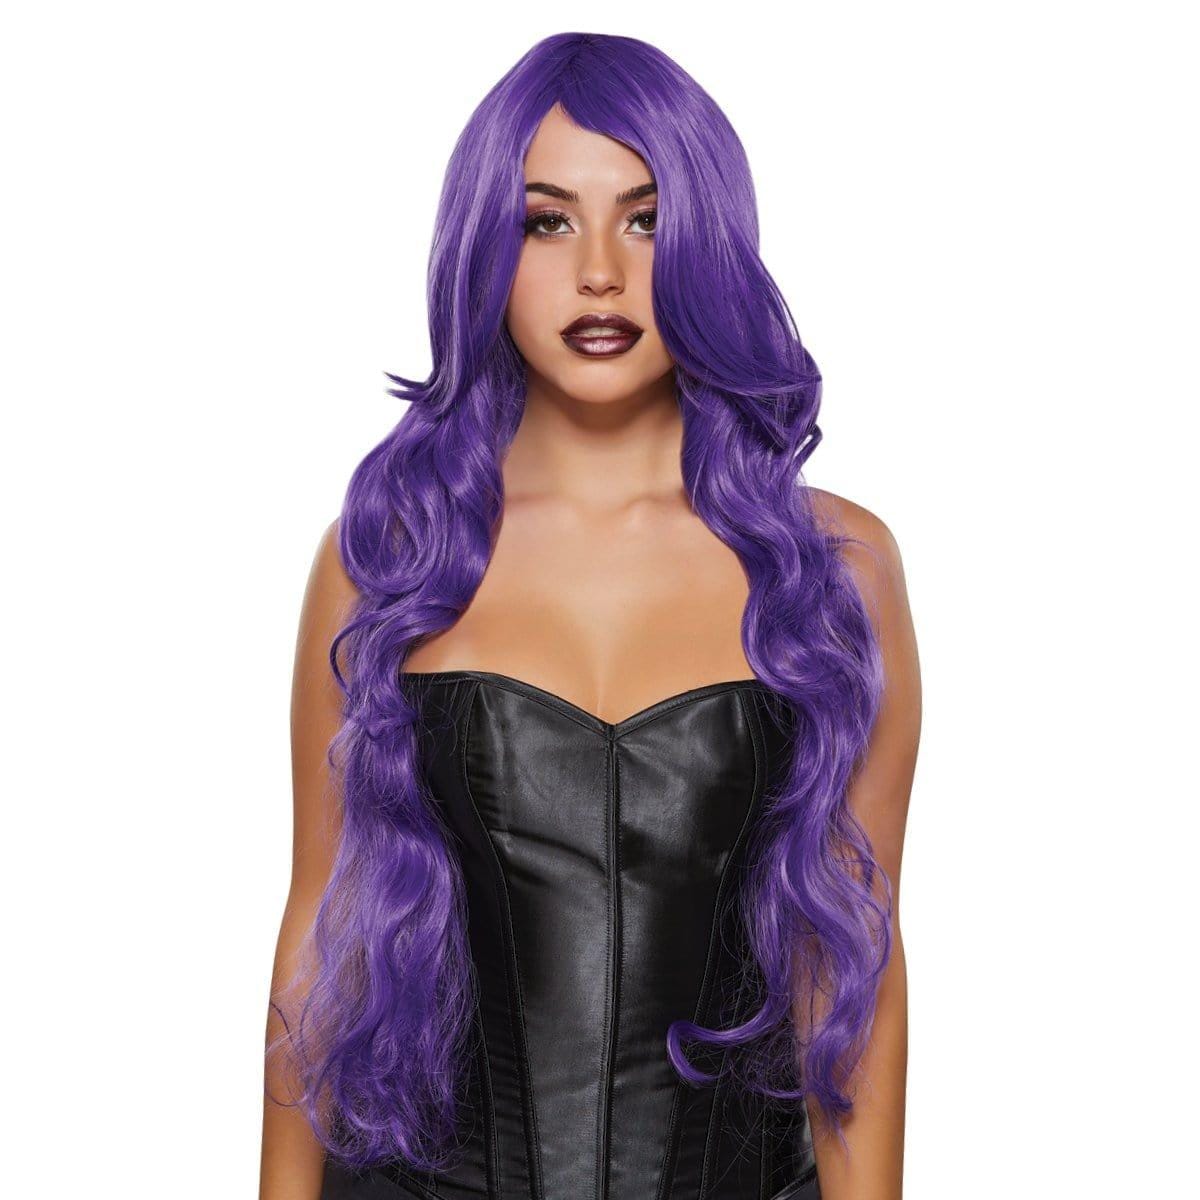 Buy Costume Accessories Violet Diva wig for women sold at Party Expert